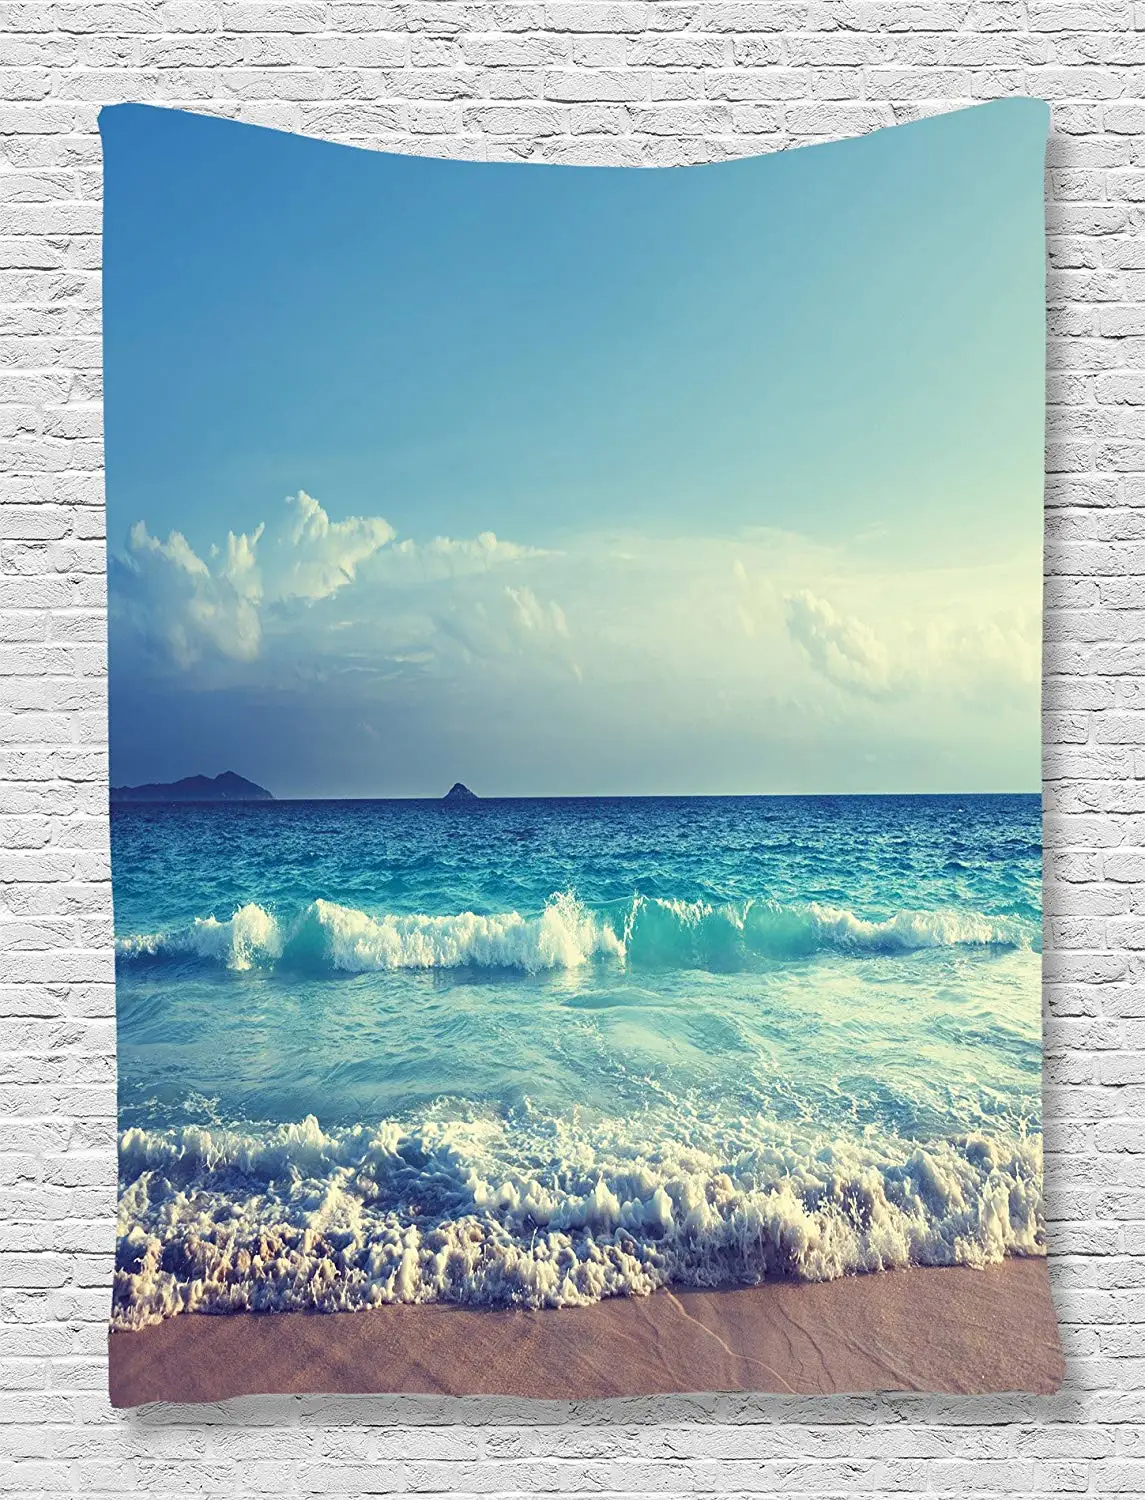 

Beach Tapestry Tropical Decor Ocean Waves Seychelles Island Beach in Sunset Bedroom Living Room Dorm Wall Hanging Tapestry